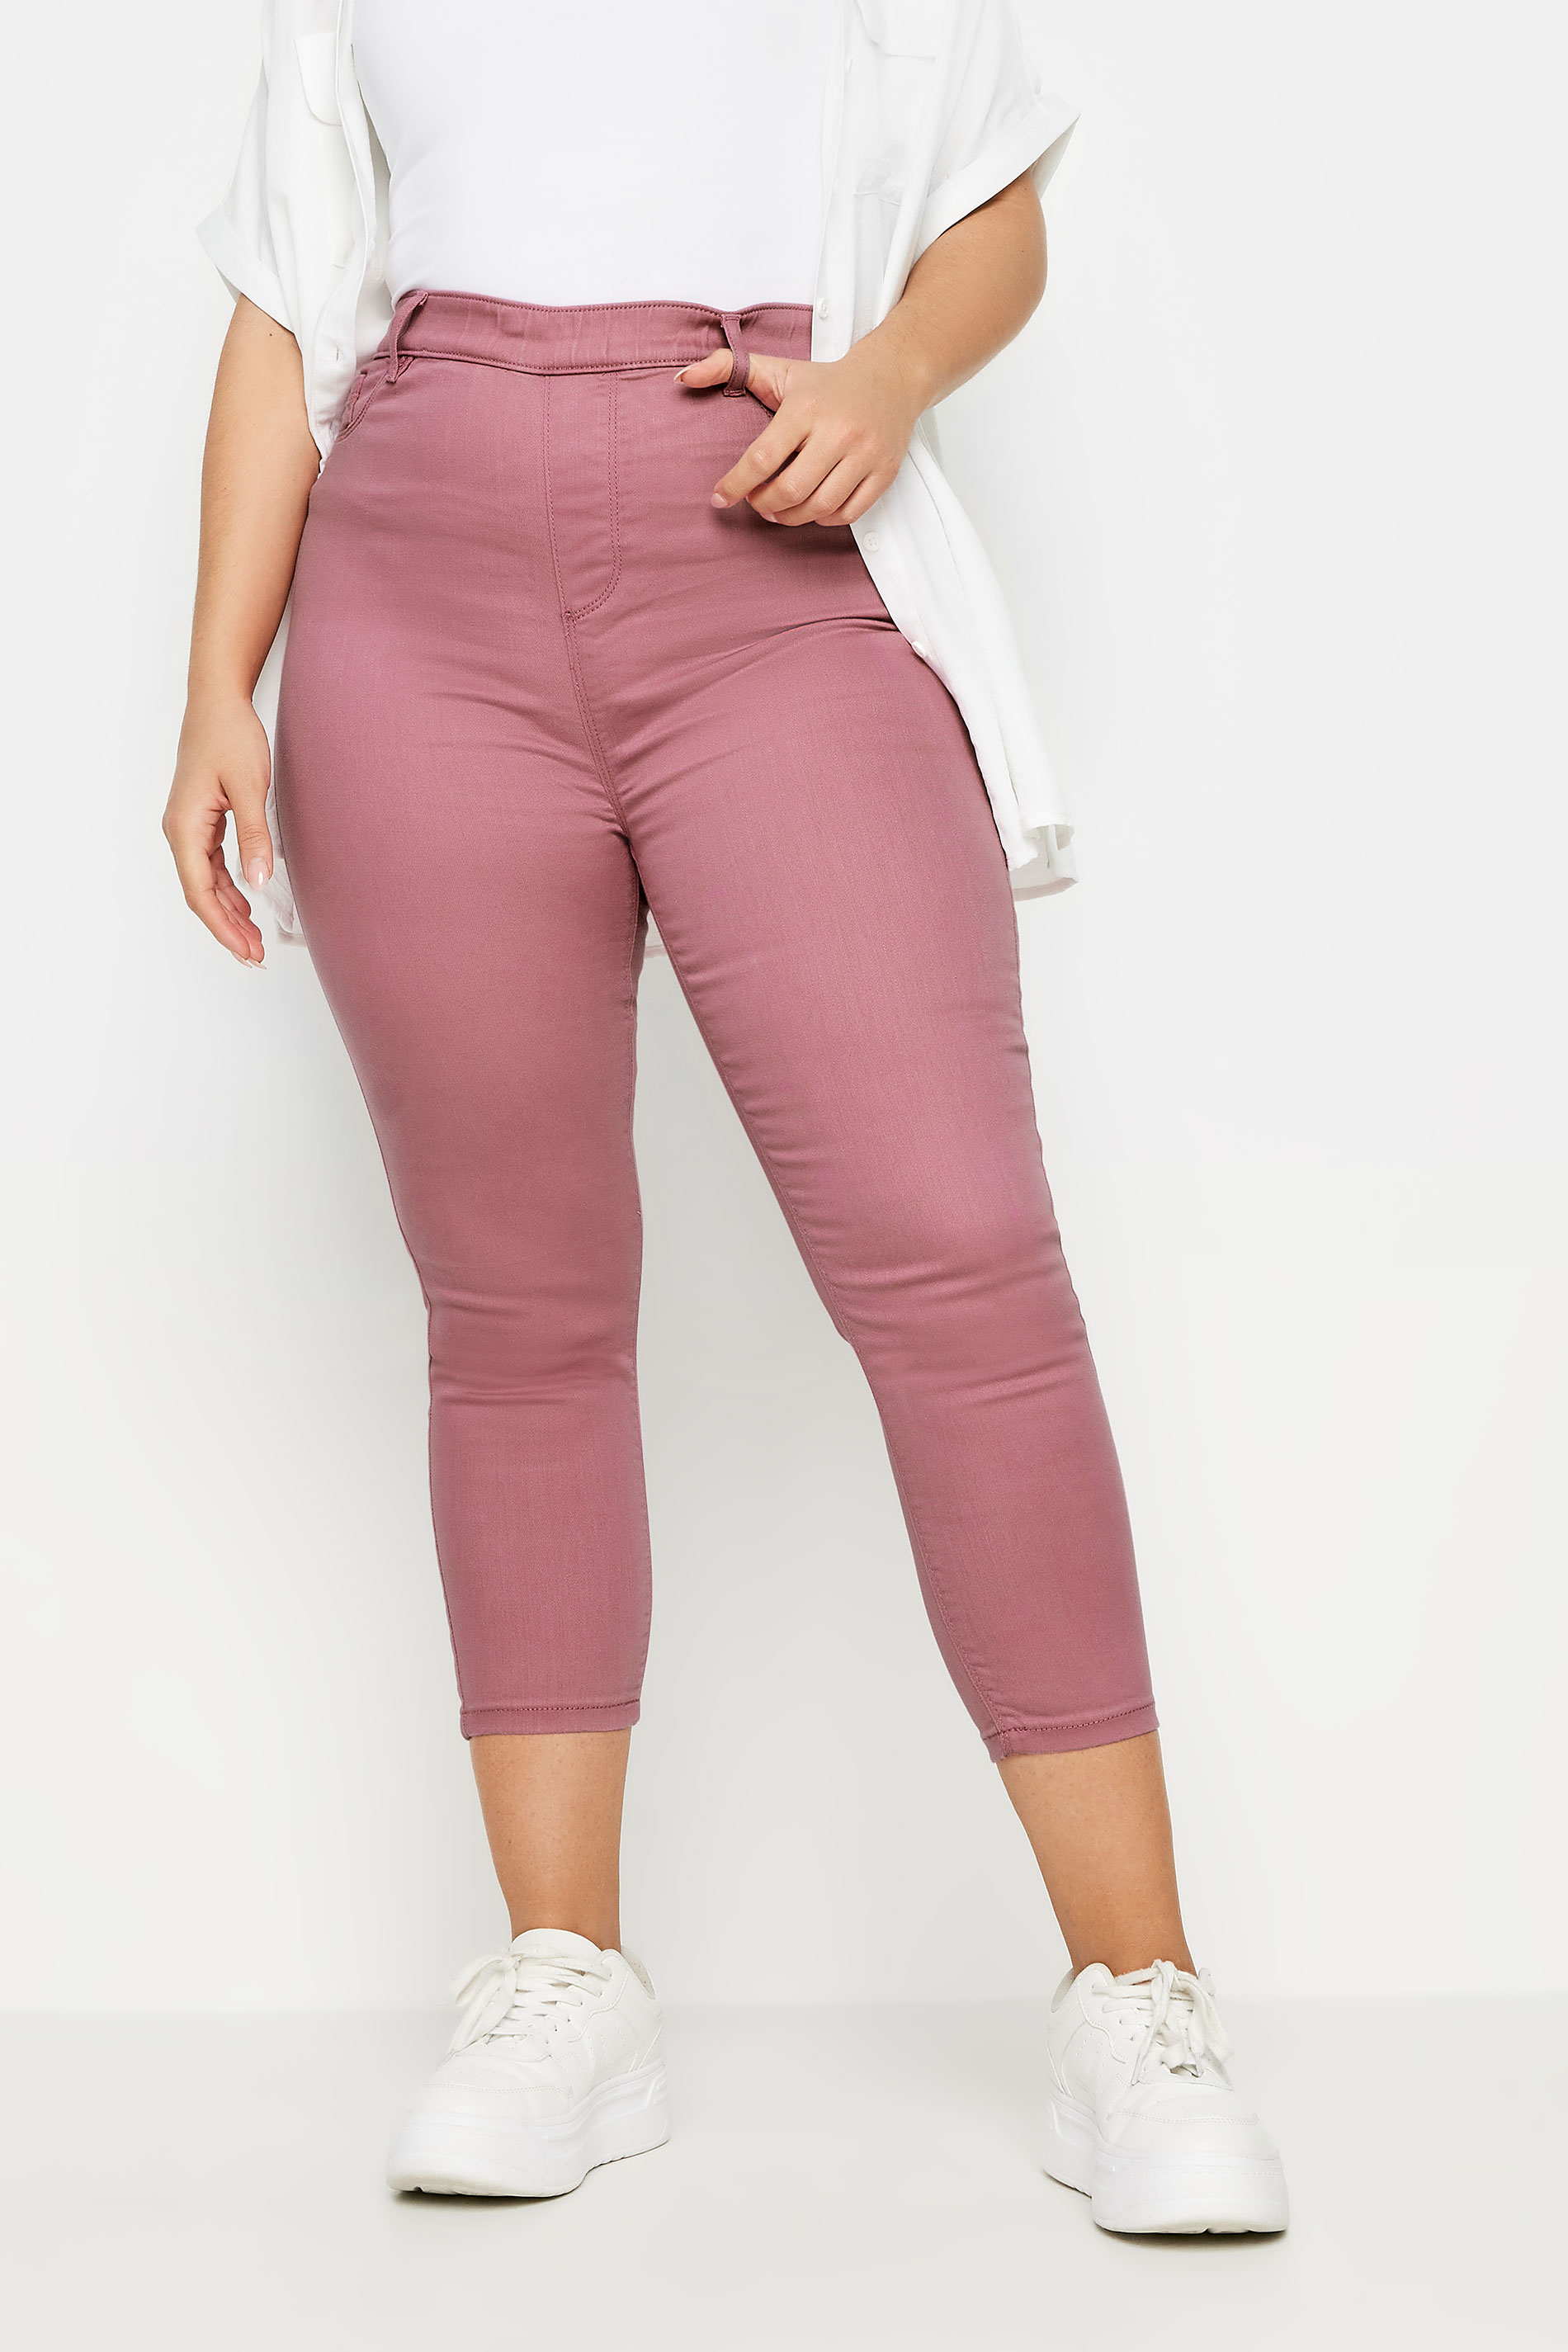 Pink High Waist Crop Jeggings - Cropped Jeggings